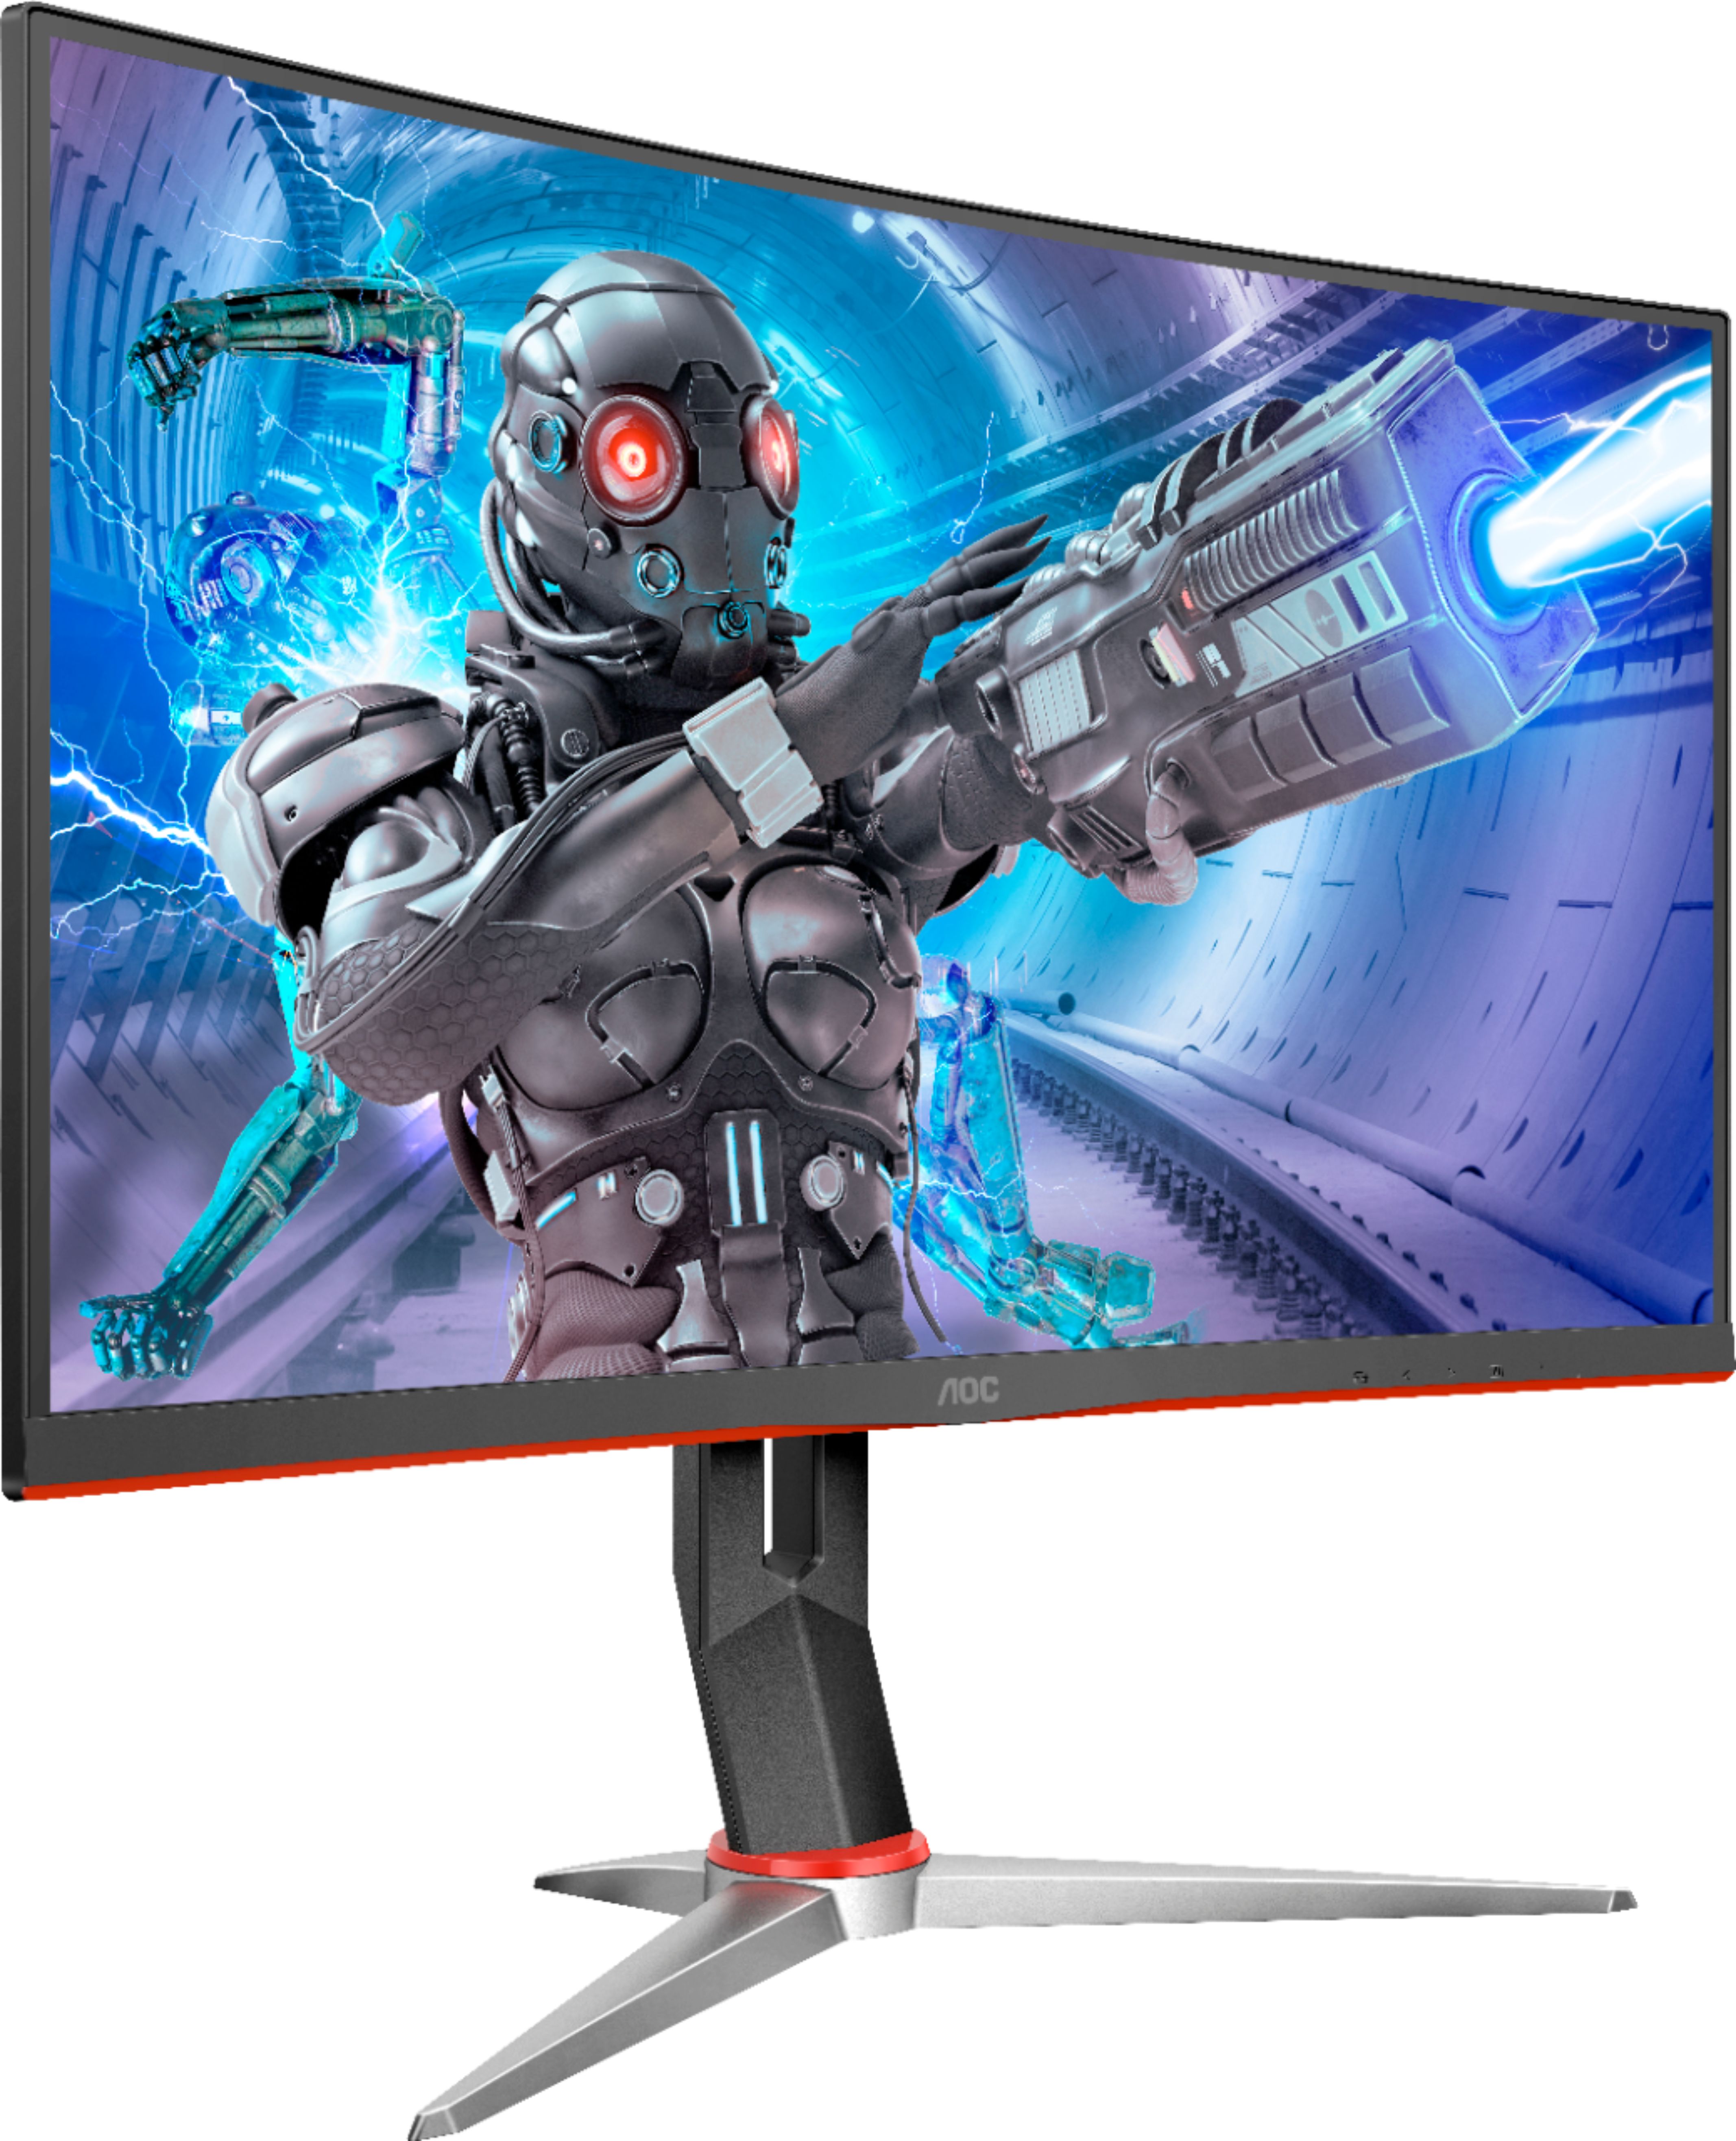 Angle View: AOC - Geek Squad Certified Refurbished G2 Series 24" LED Curved FHD FreeSync Monitor - Black/Red